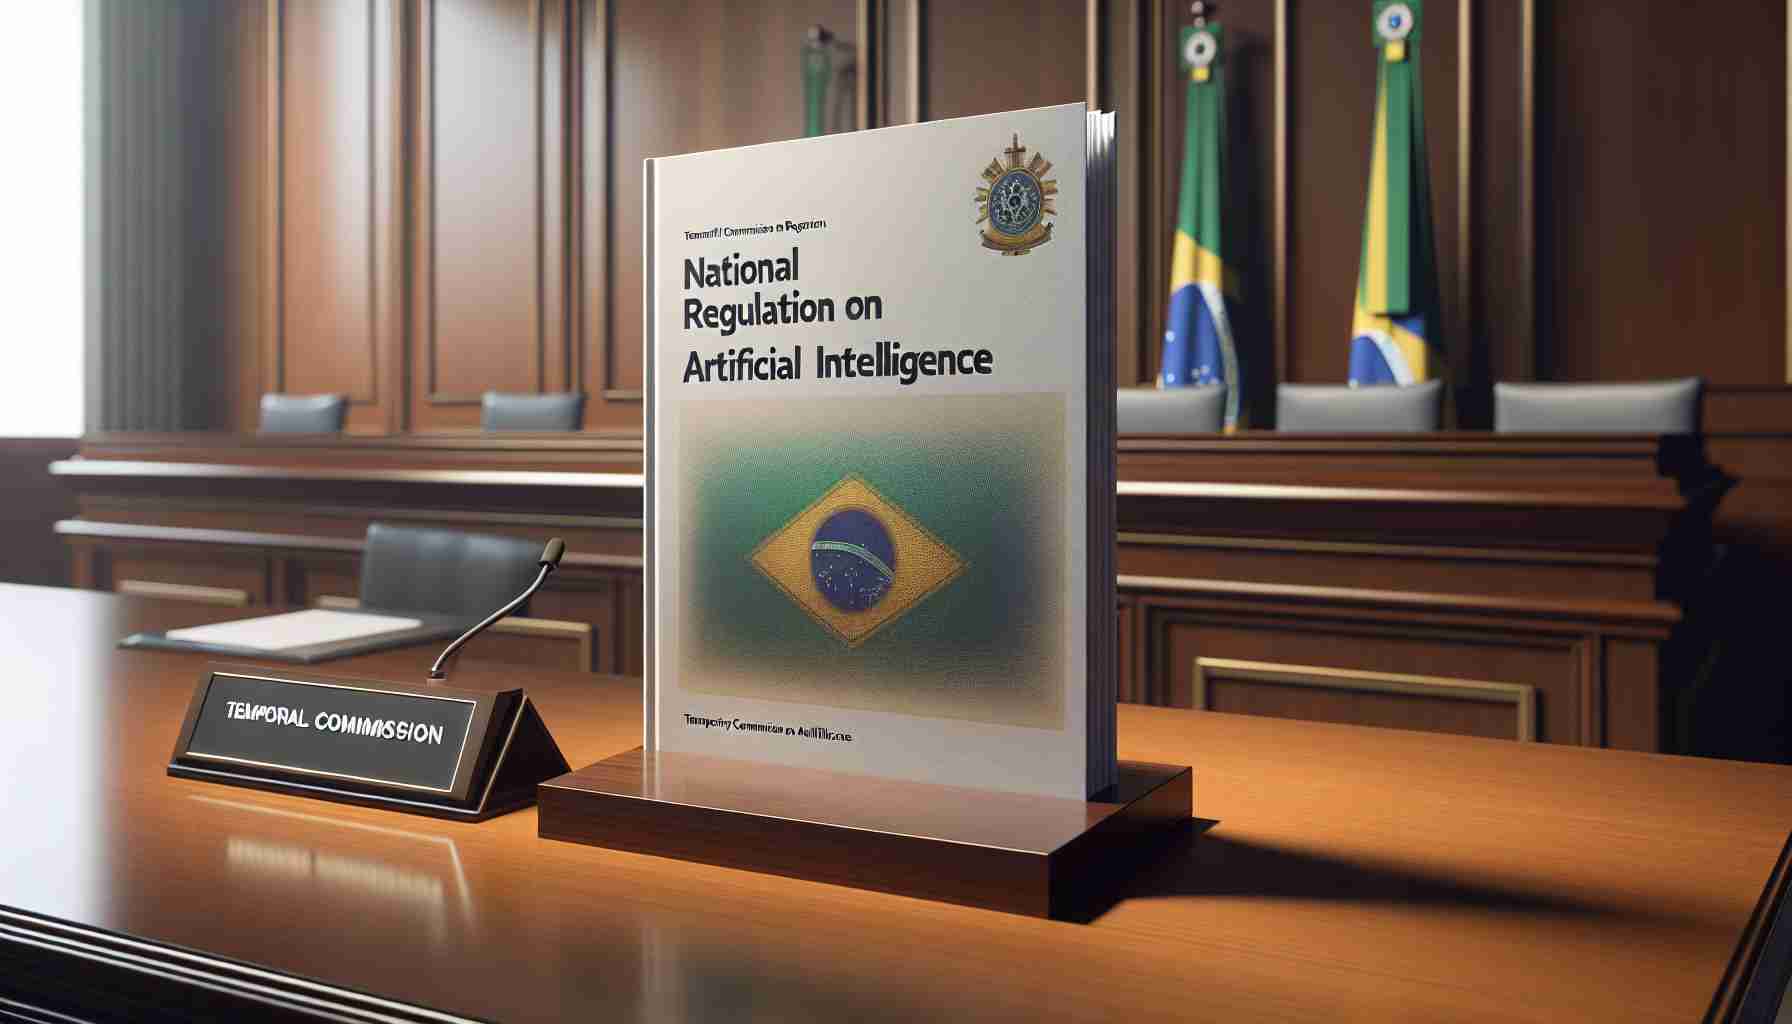 Brazil’s Temporary Commission on Artificial Intelligence Outlines Preliminary Report for National Regulation